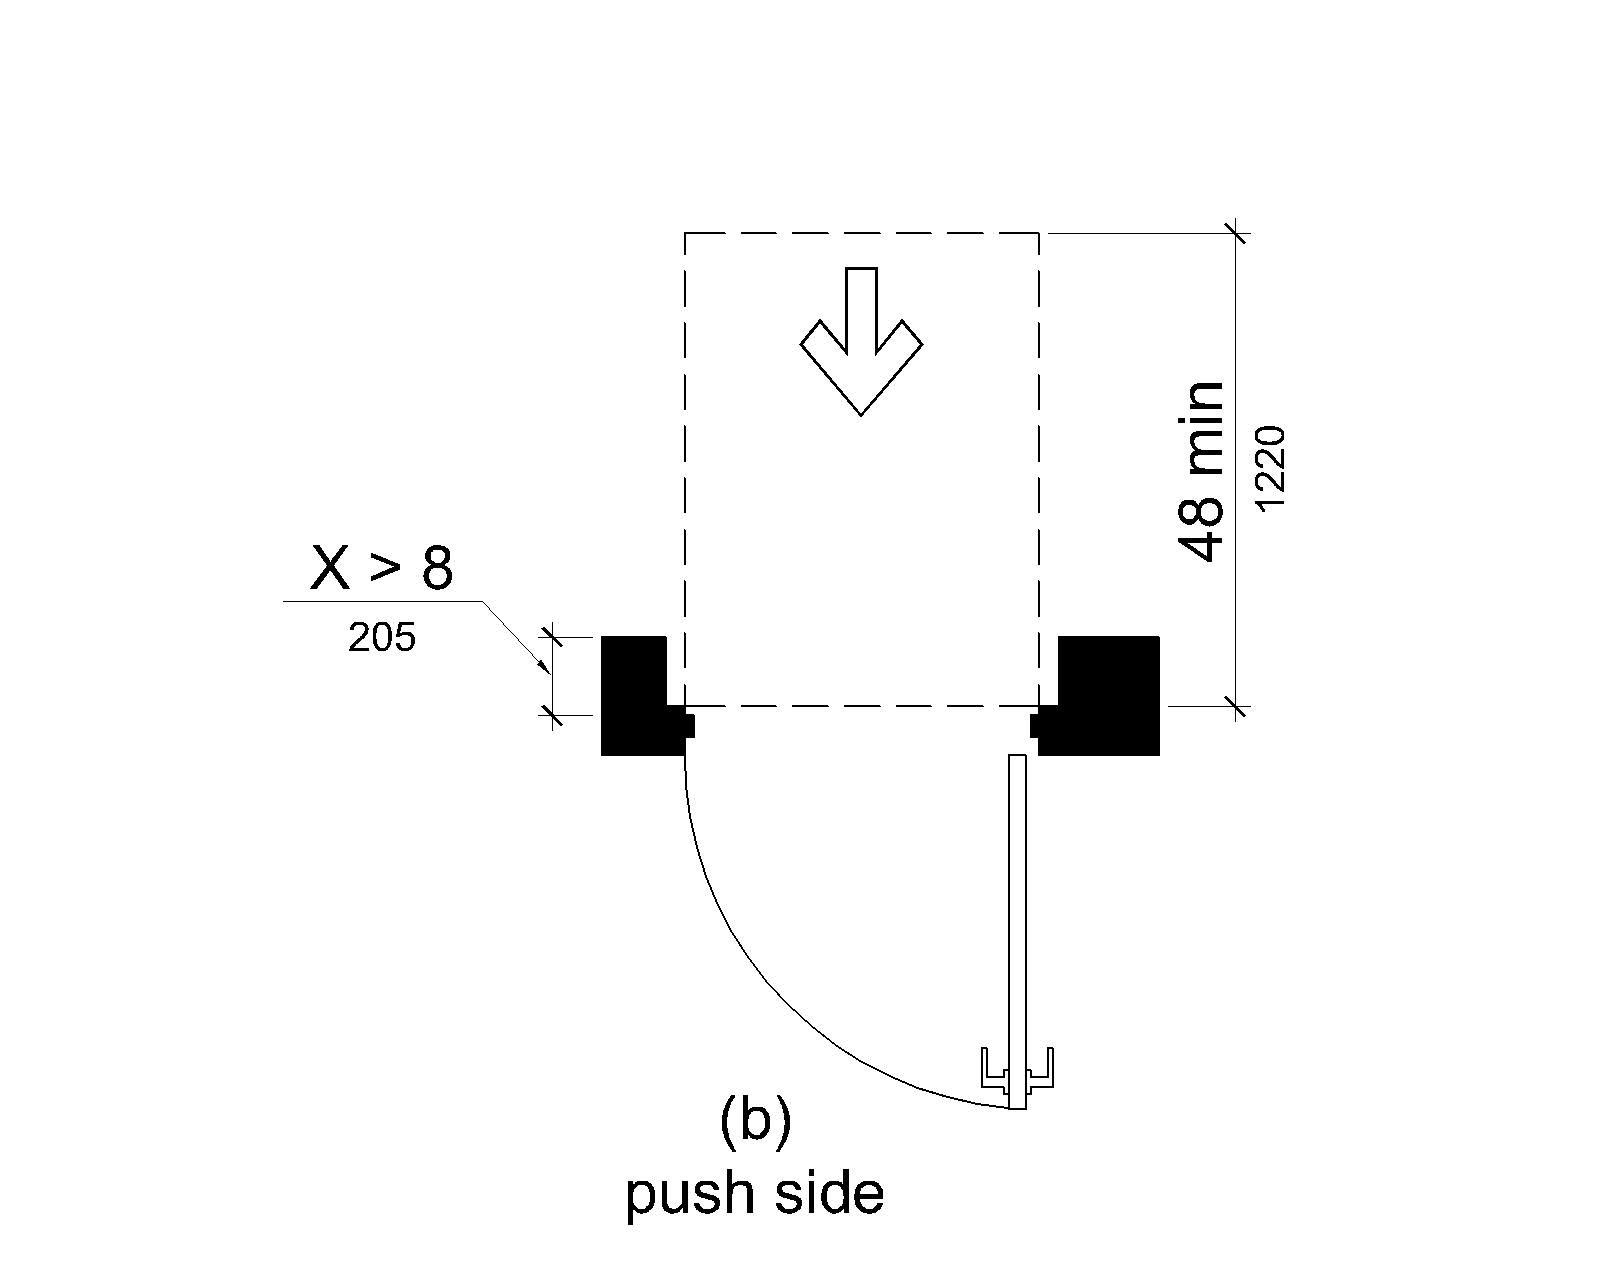 (b) On the push side of doors not equipped with a closer or latch, the maneuvering space is the same width as the door opening and extends 48 inches (1220 mm) minimum perpendicular to the plane of the doorway.